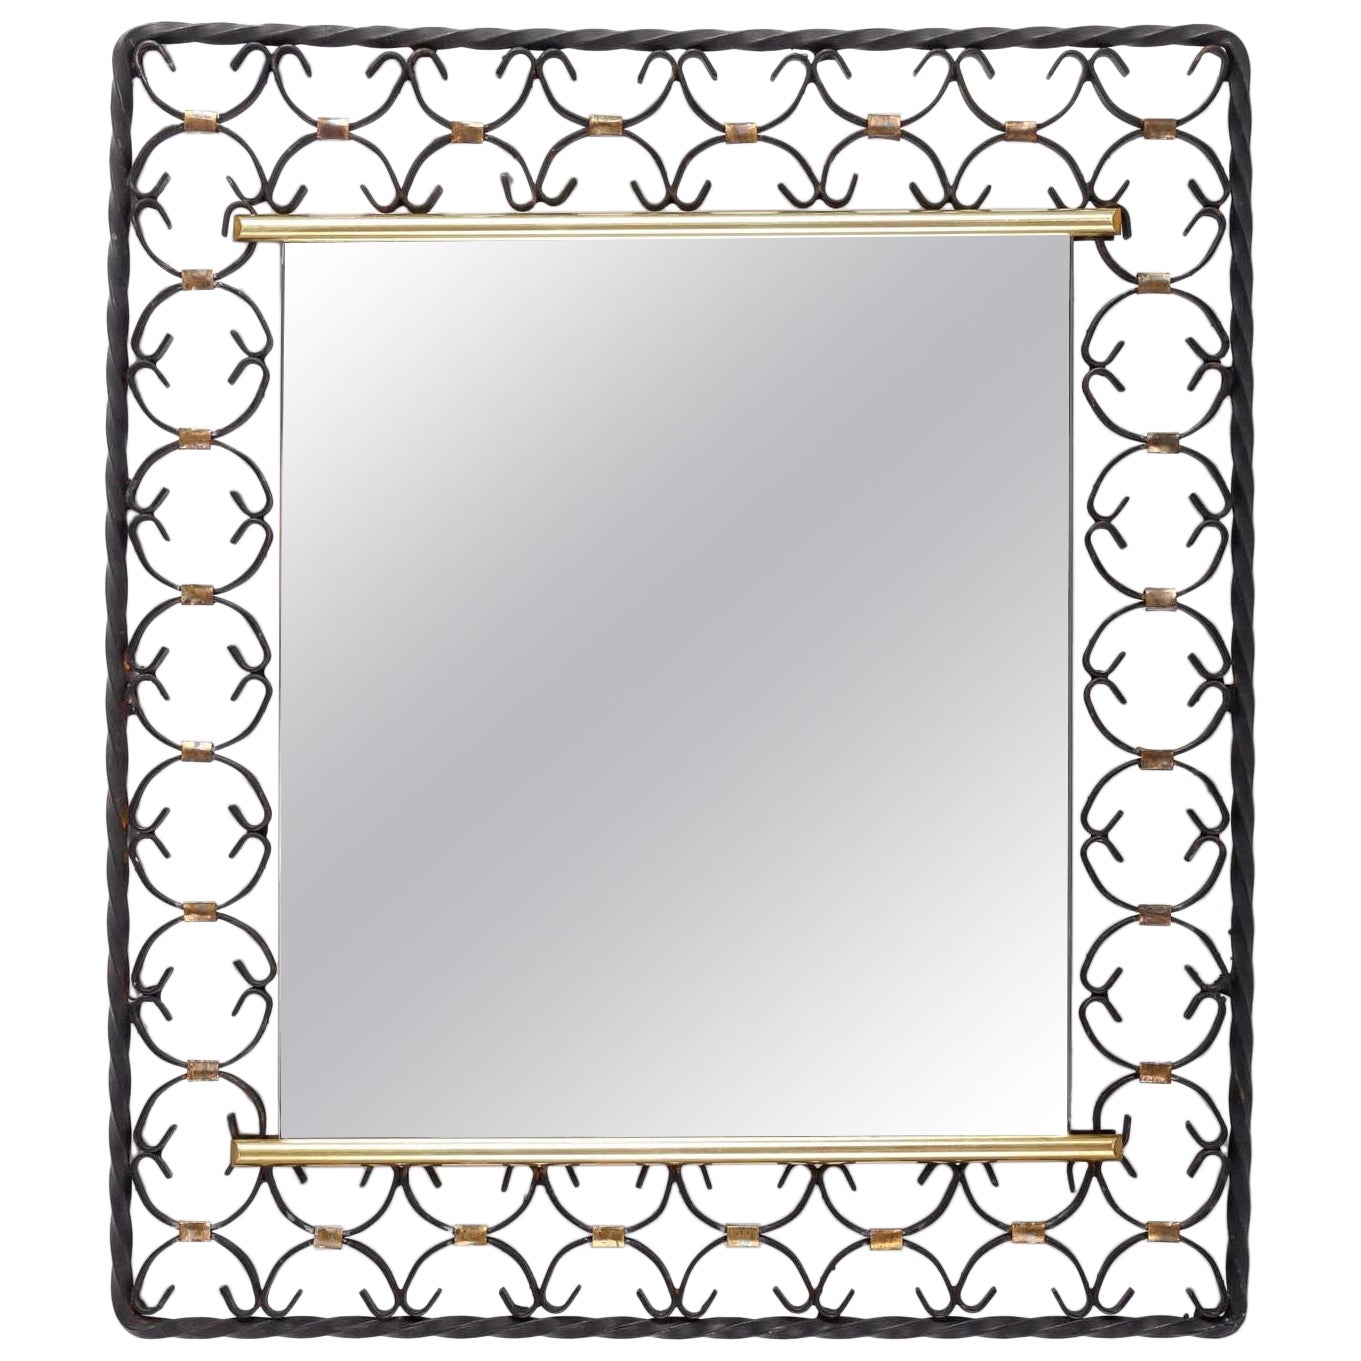 Wrought Iron and Brass Mirror, 1950s-1960s Design. For Sale